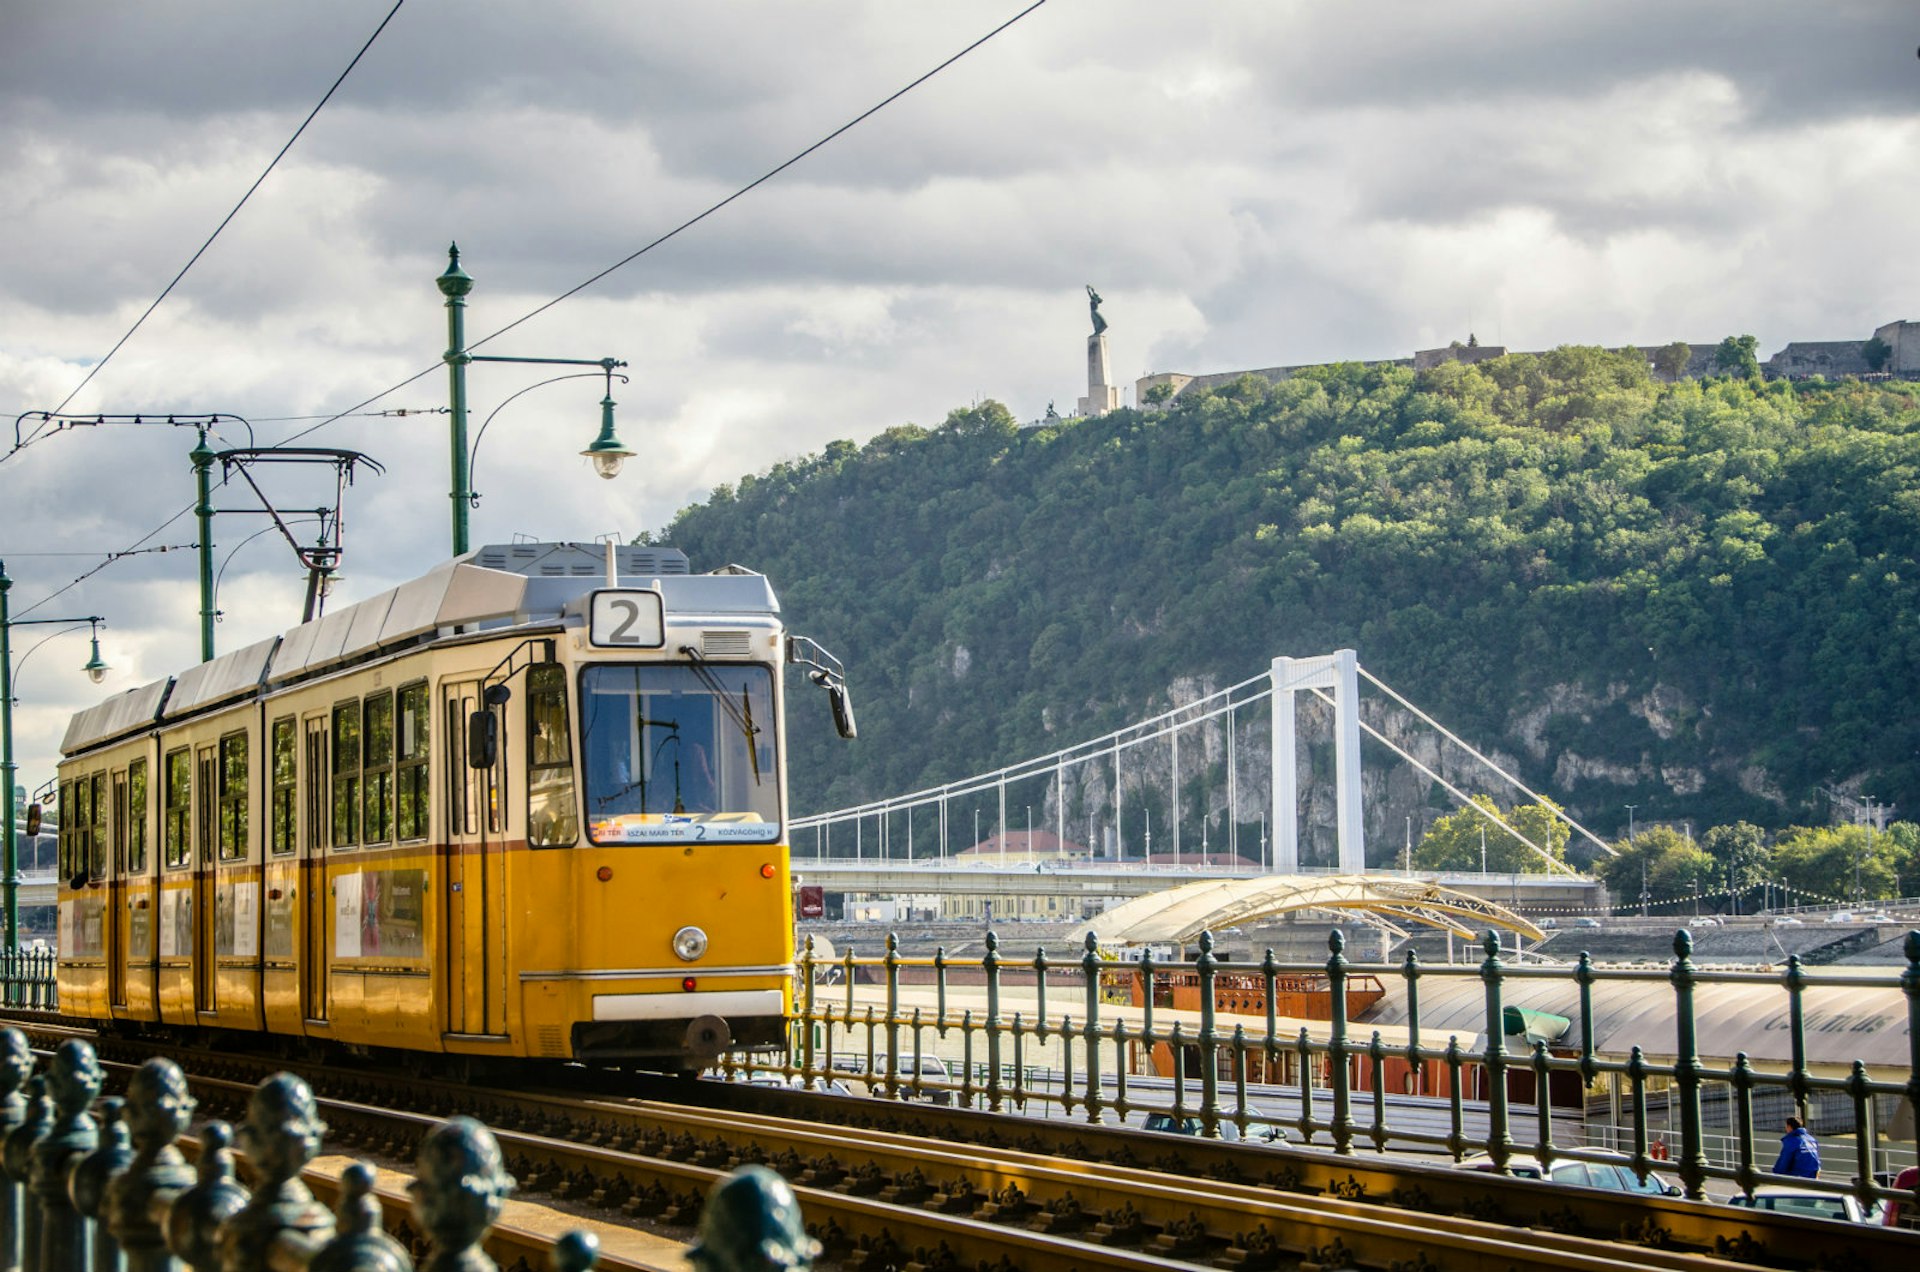 Take a tour along the Danube in Budapest's Tram number two© titoslack / Getty Images